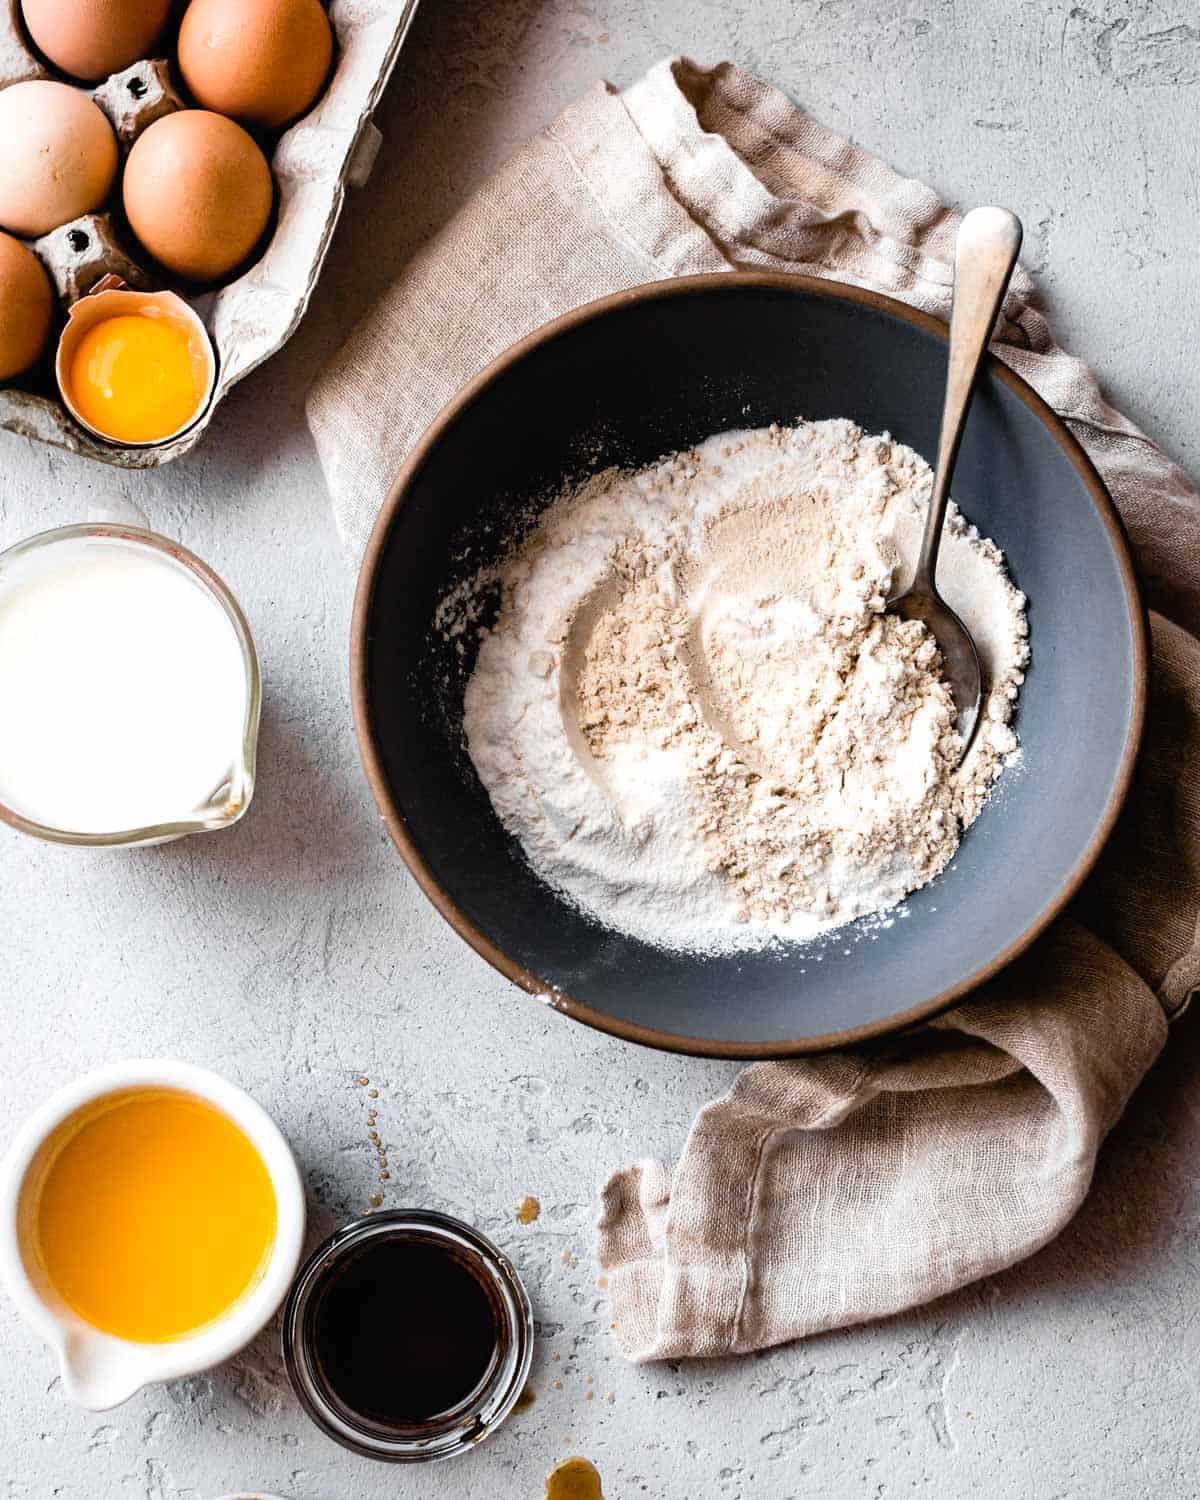 bowl of flour on plaster surface with beige linen, eggs, and other ingredients for passover dessert recipes